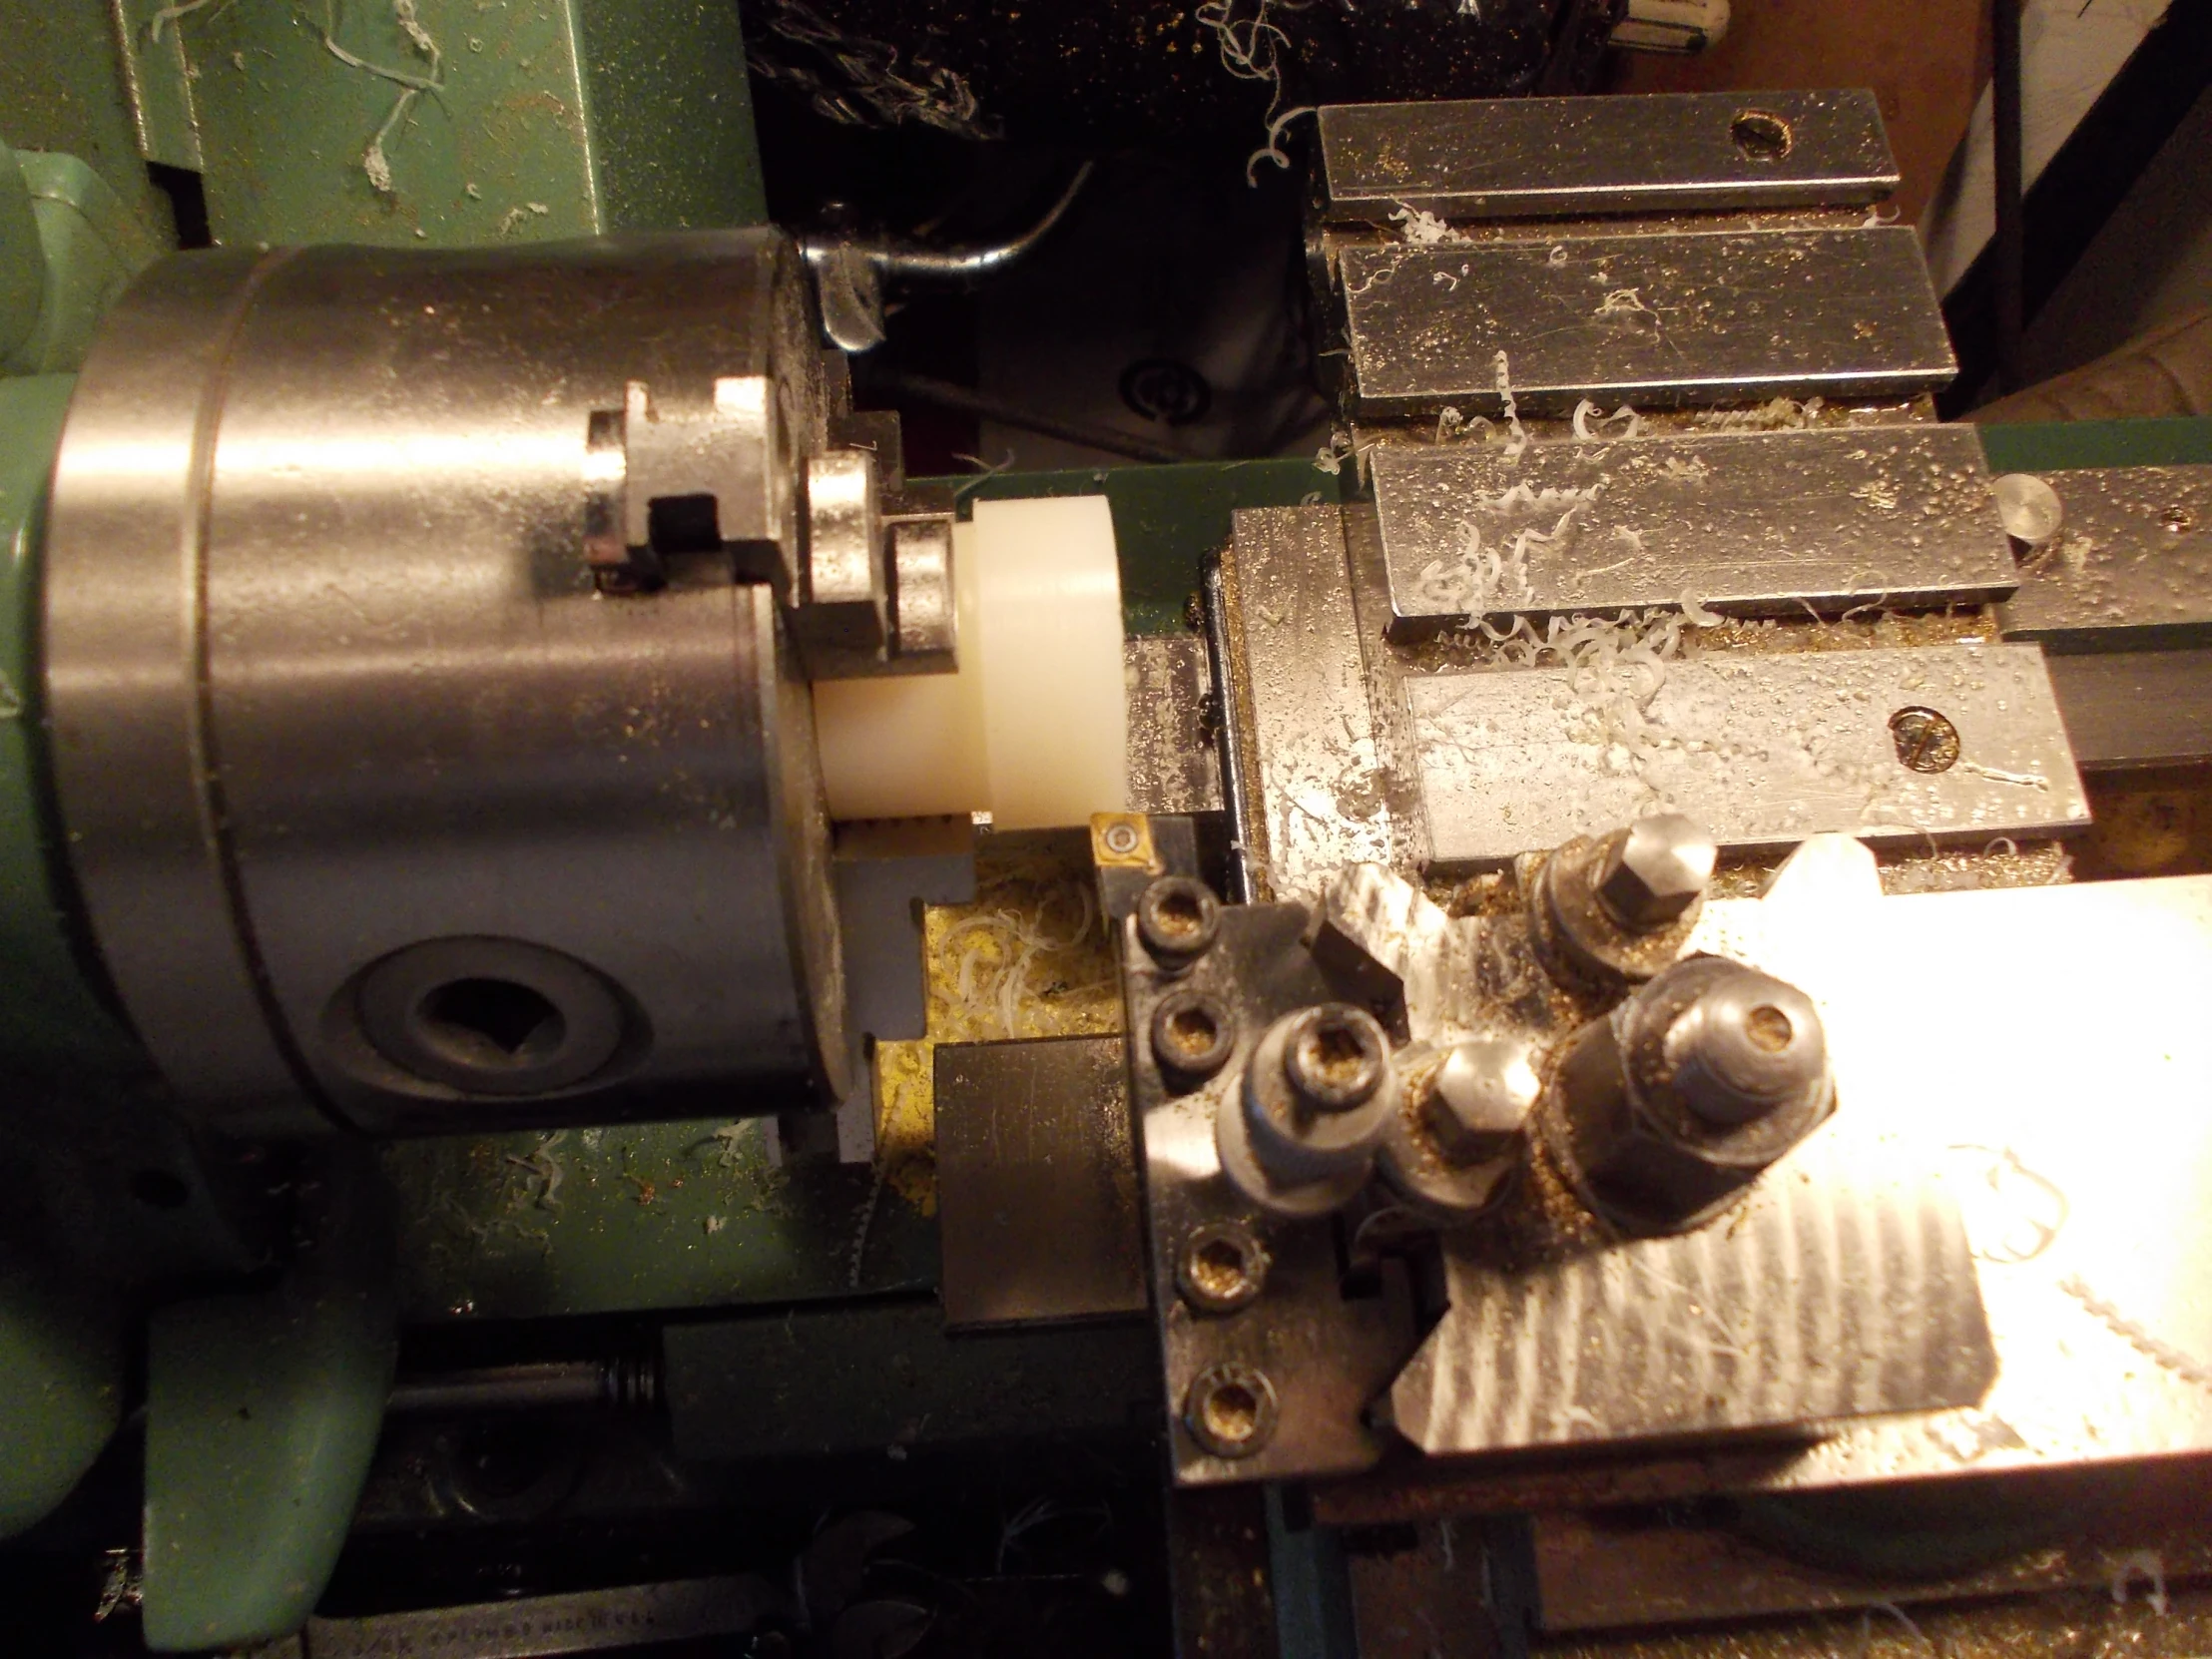 we see a milling machine with several holes